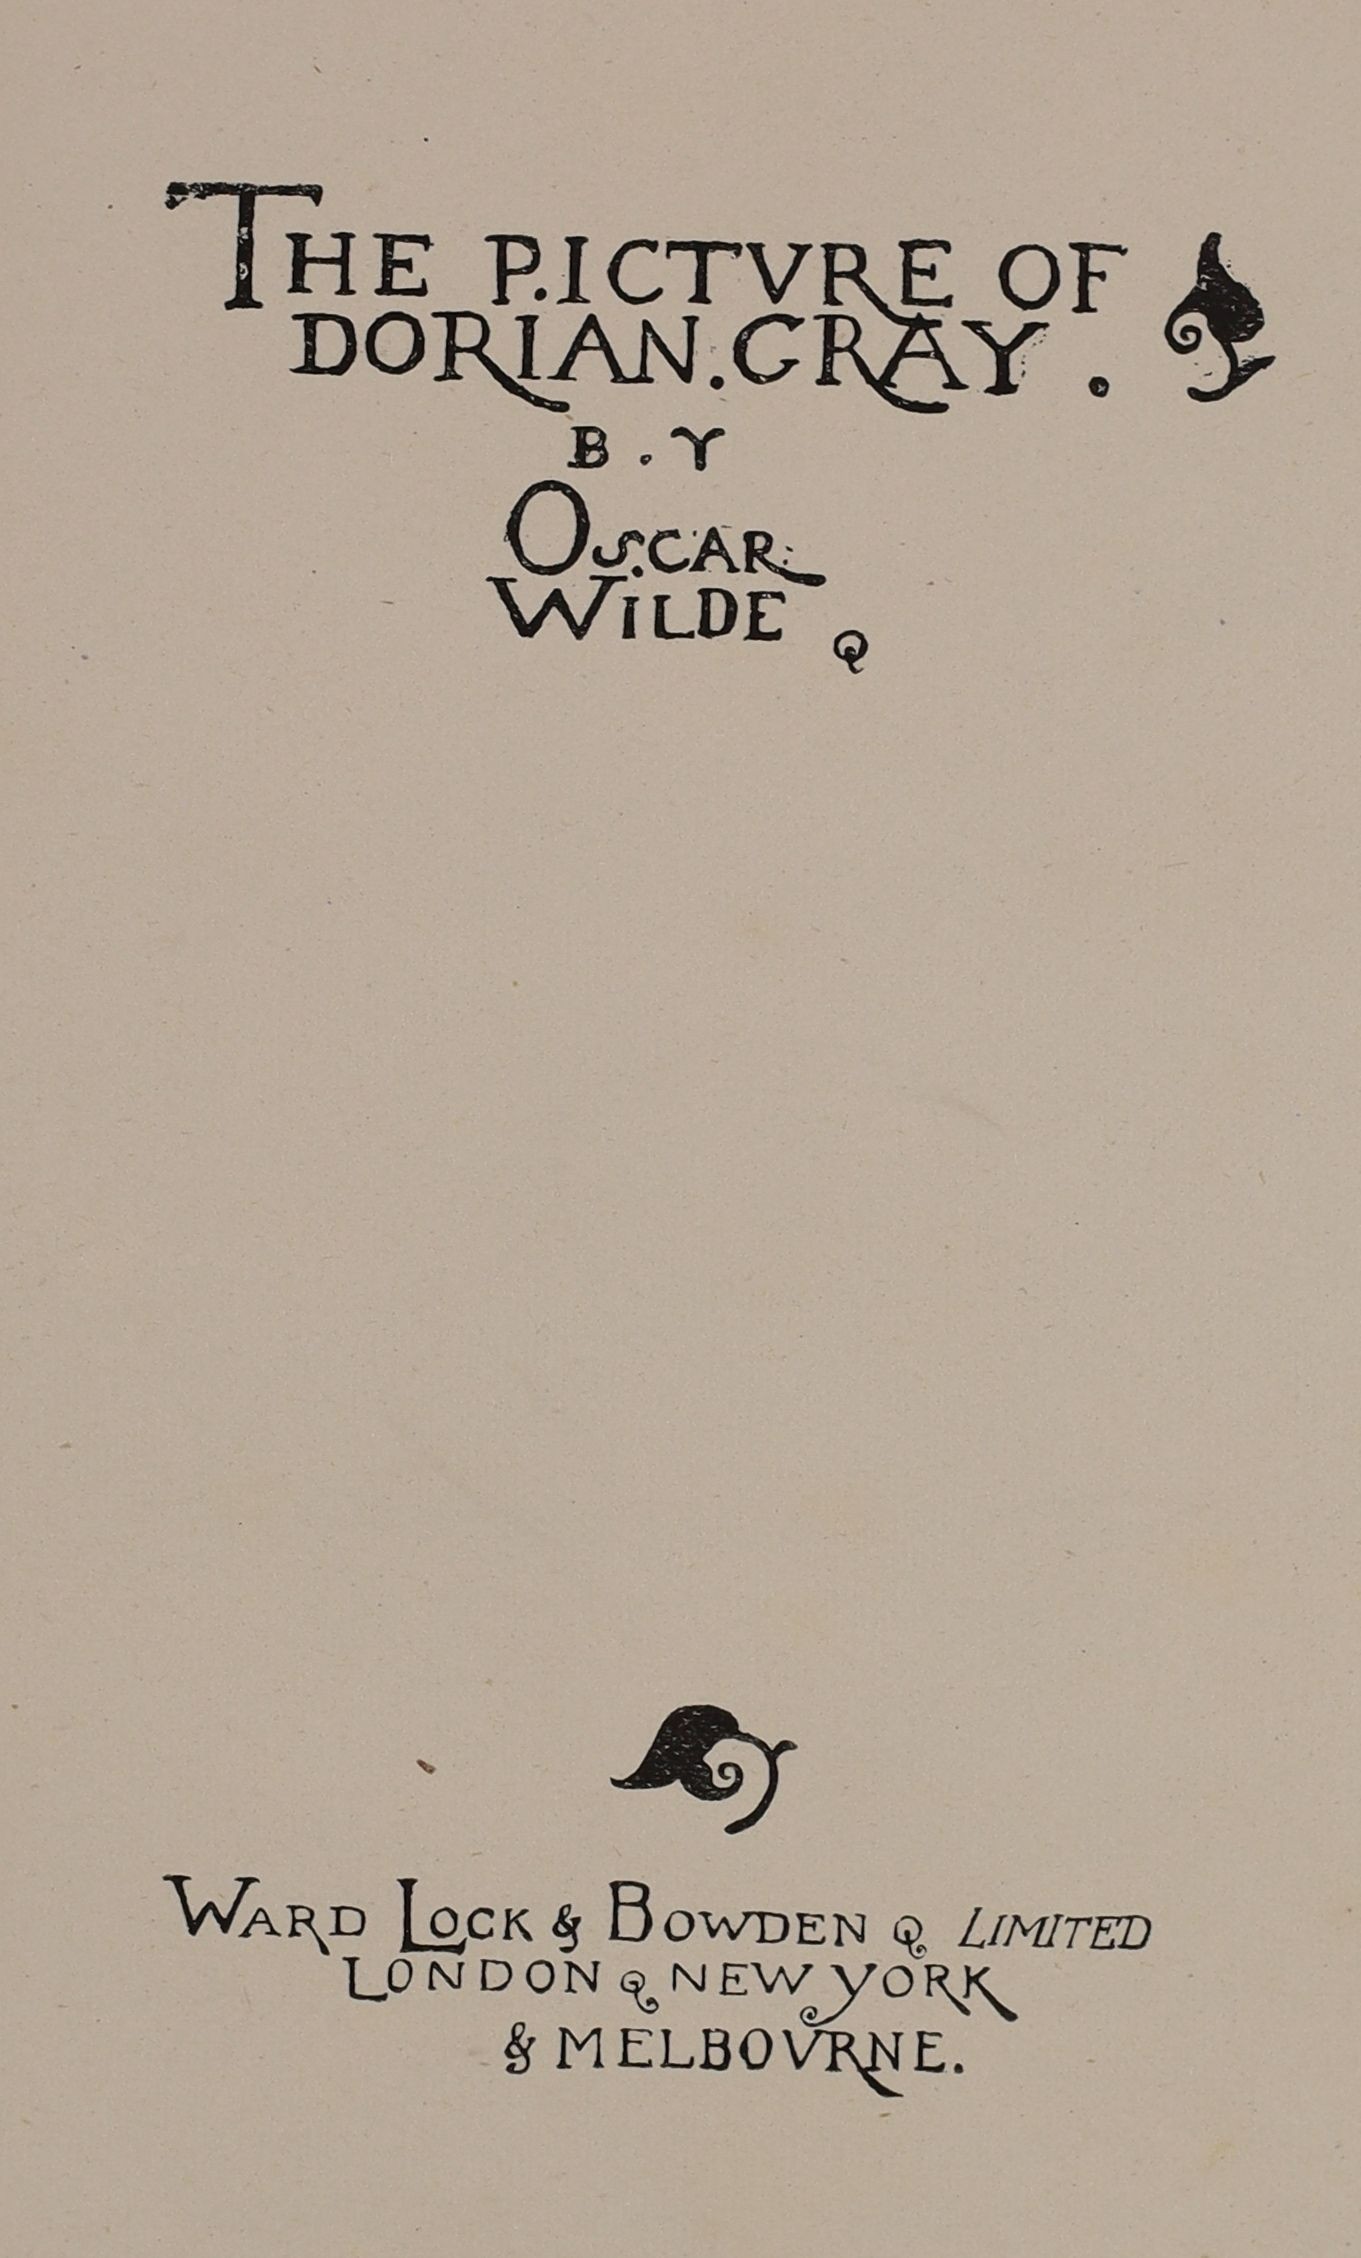 Wilde, Oscar - The Picture of Dorian Gray, 2nd edition, 8vo, quarter calf, with half title and 8pp of catalogue at rear, Ward, Lock & Bowden Ltd, London, [1895]